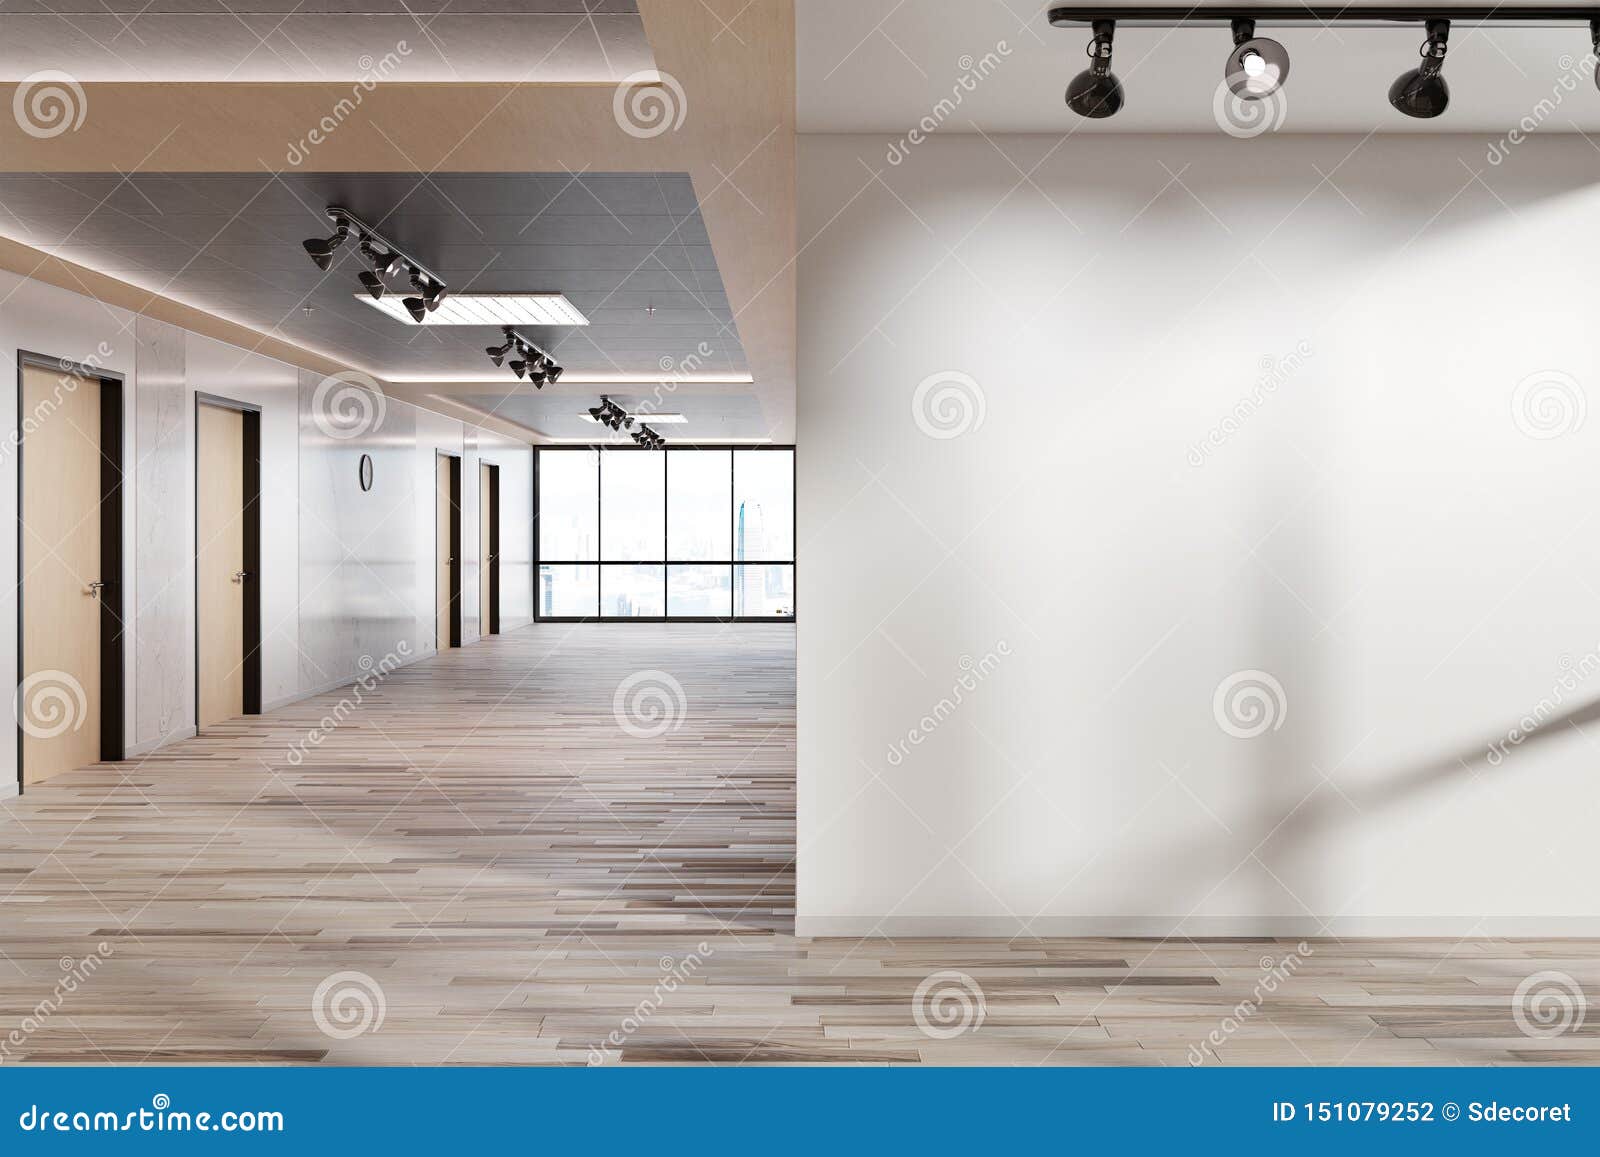 Blank Wall In Office Mockup With Large Windows And Sun ...